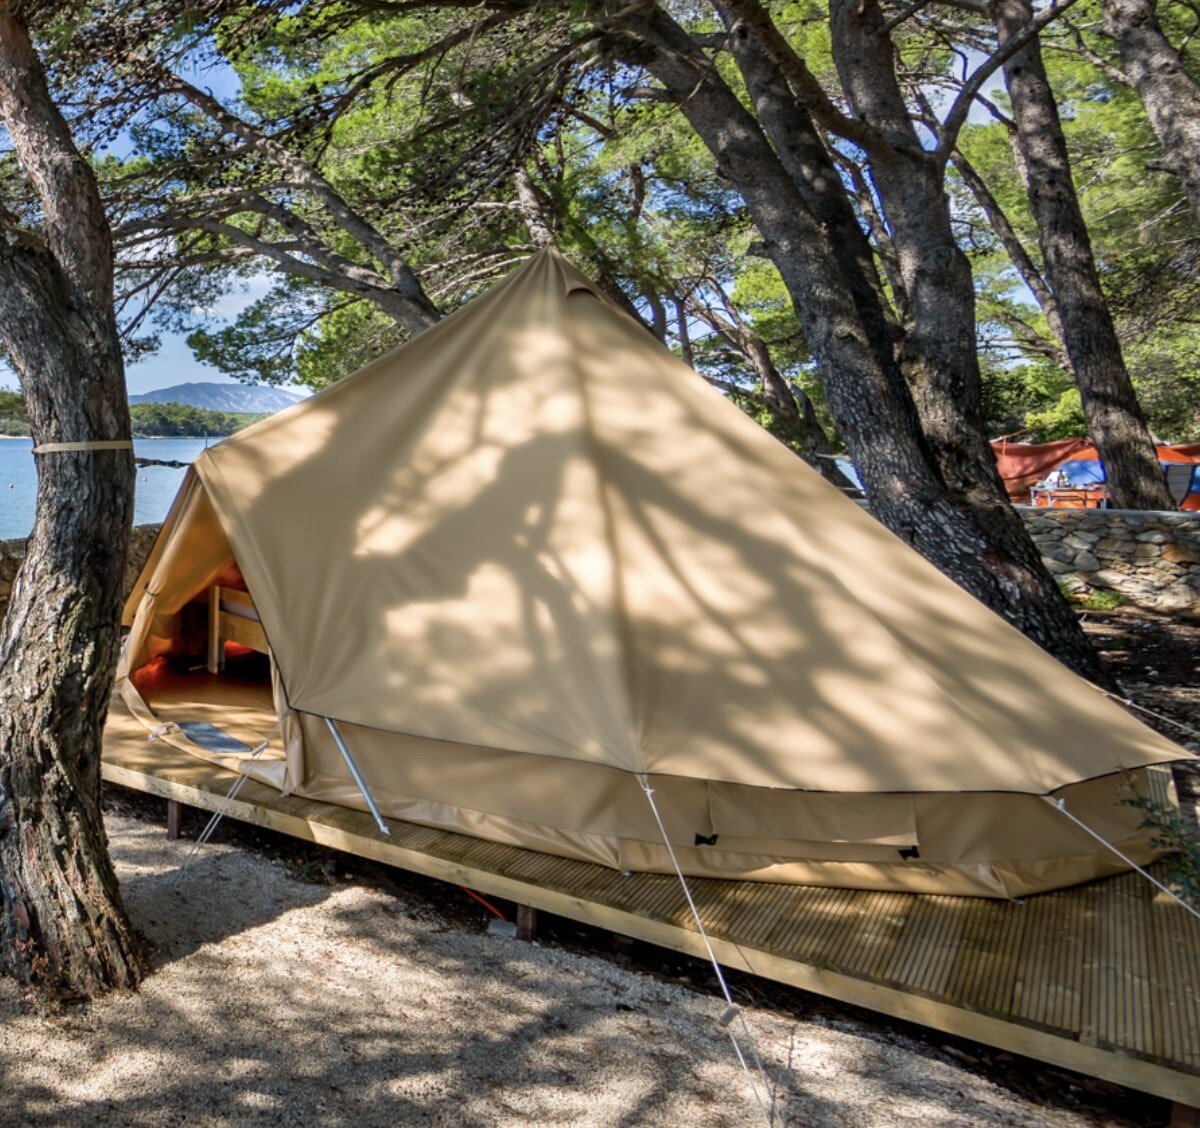 Bliss & Adventure Glamping on Soap Lake